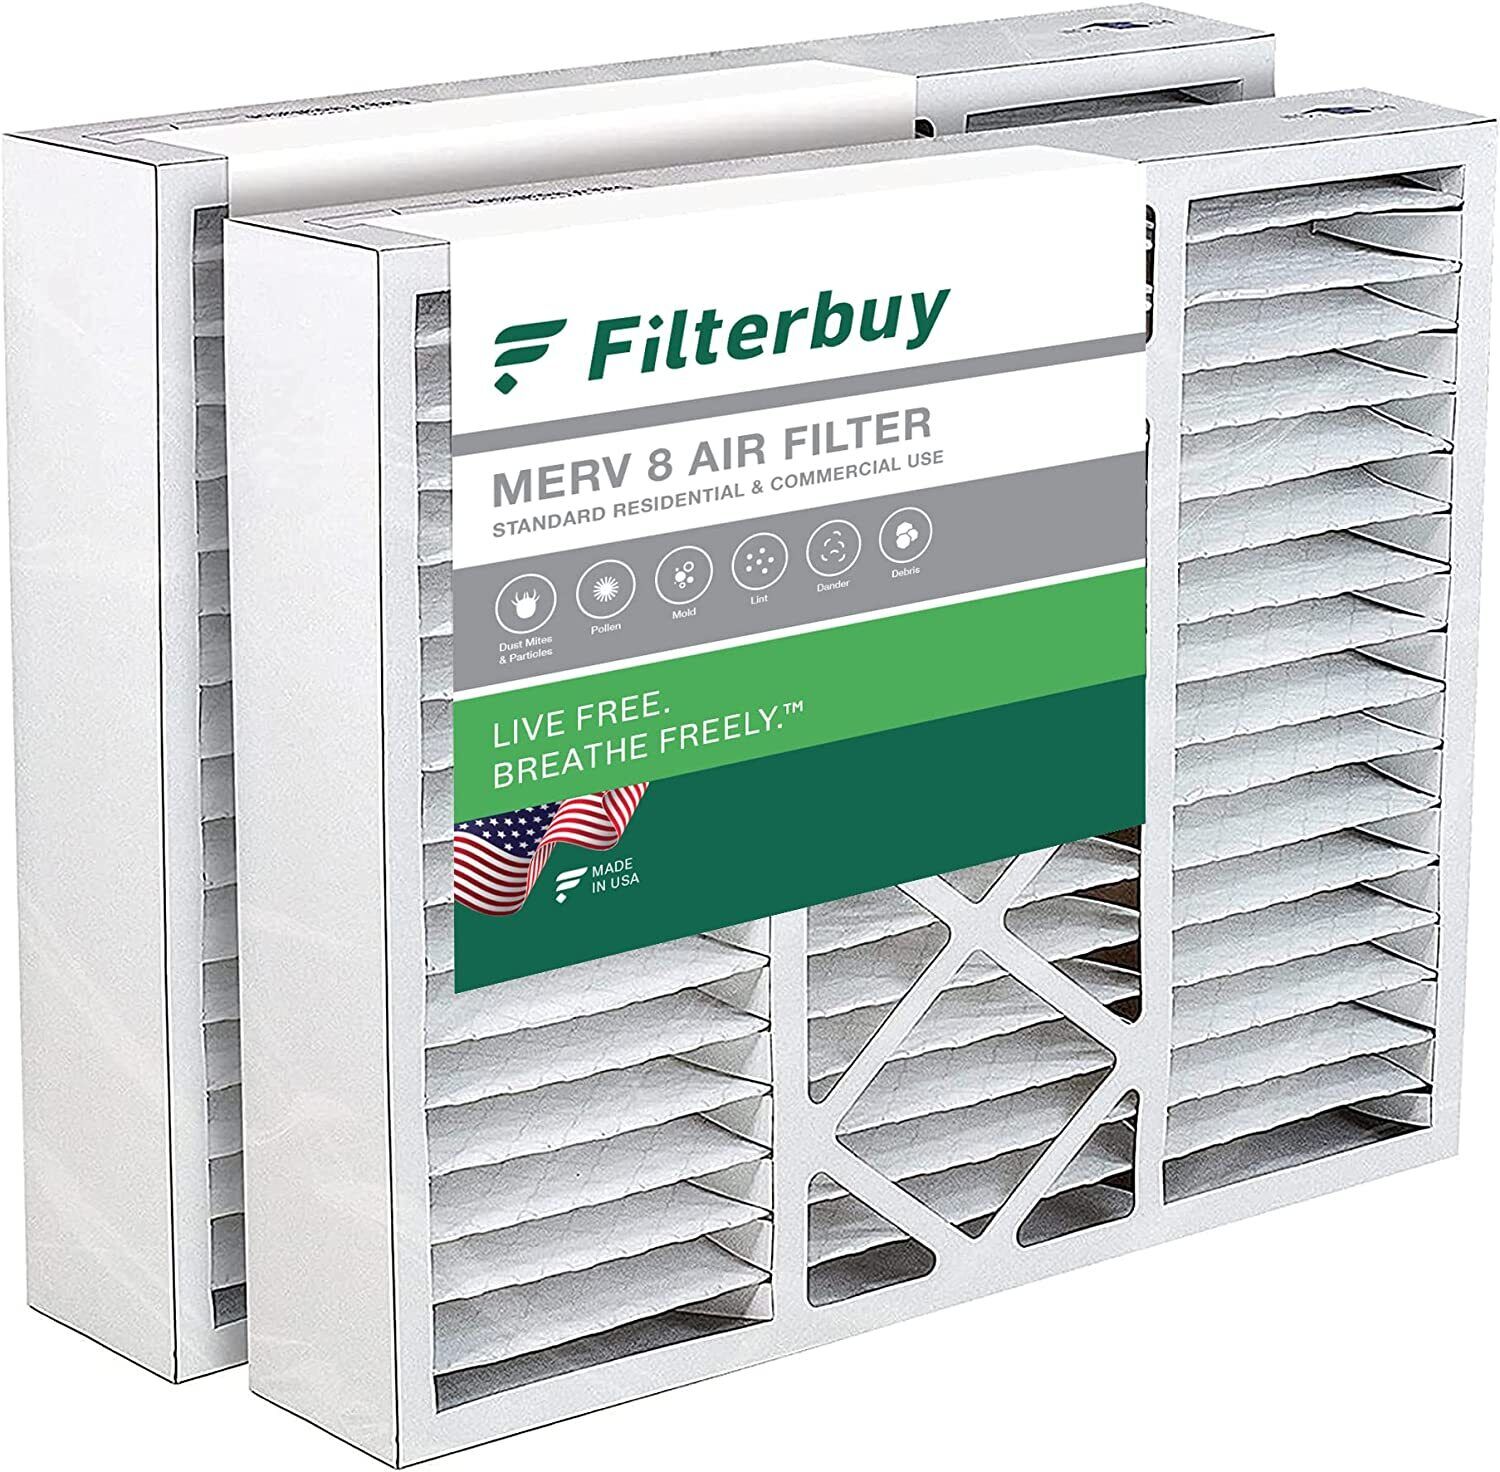 Filterbuy 20x25x5 Air Filters, AC Furnace Replacement for Honeywell (MERV 8)